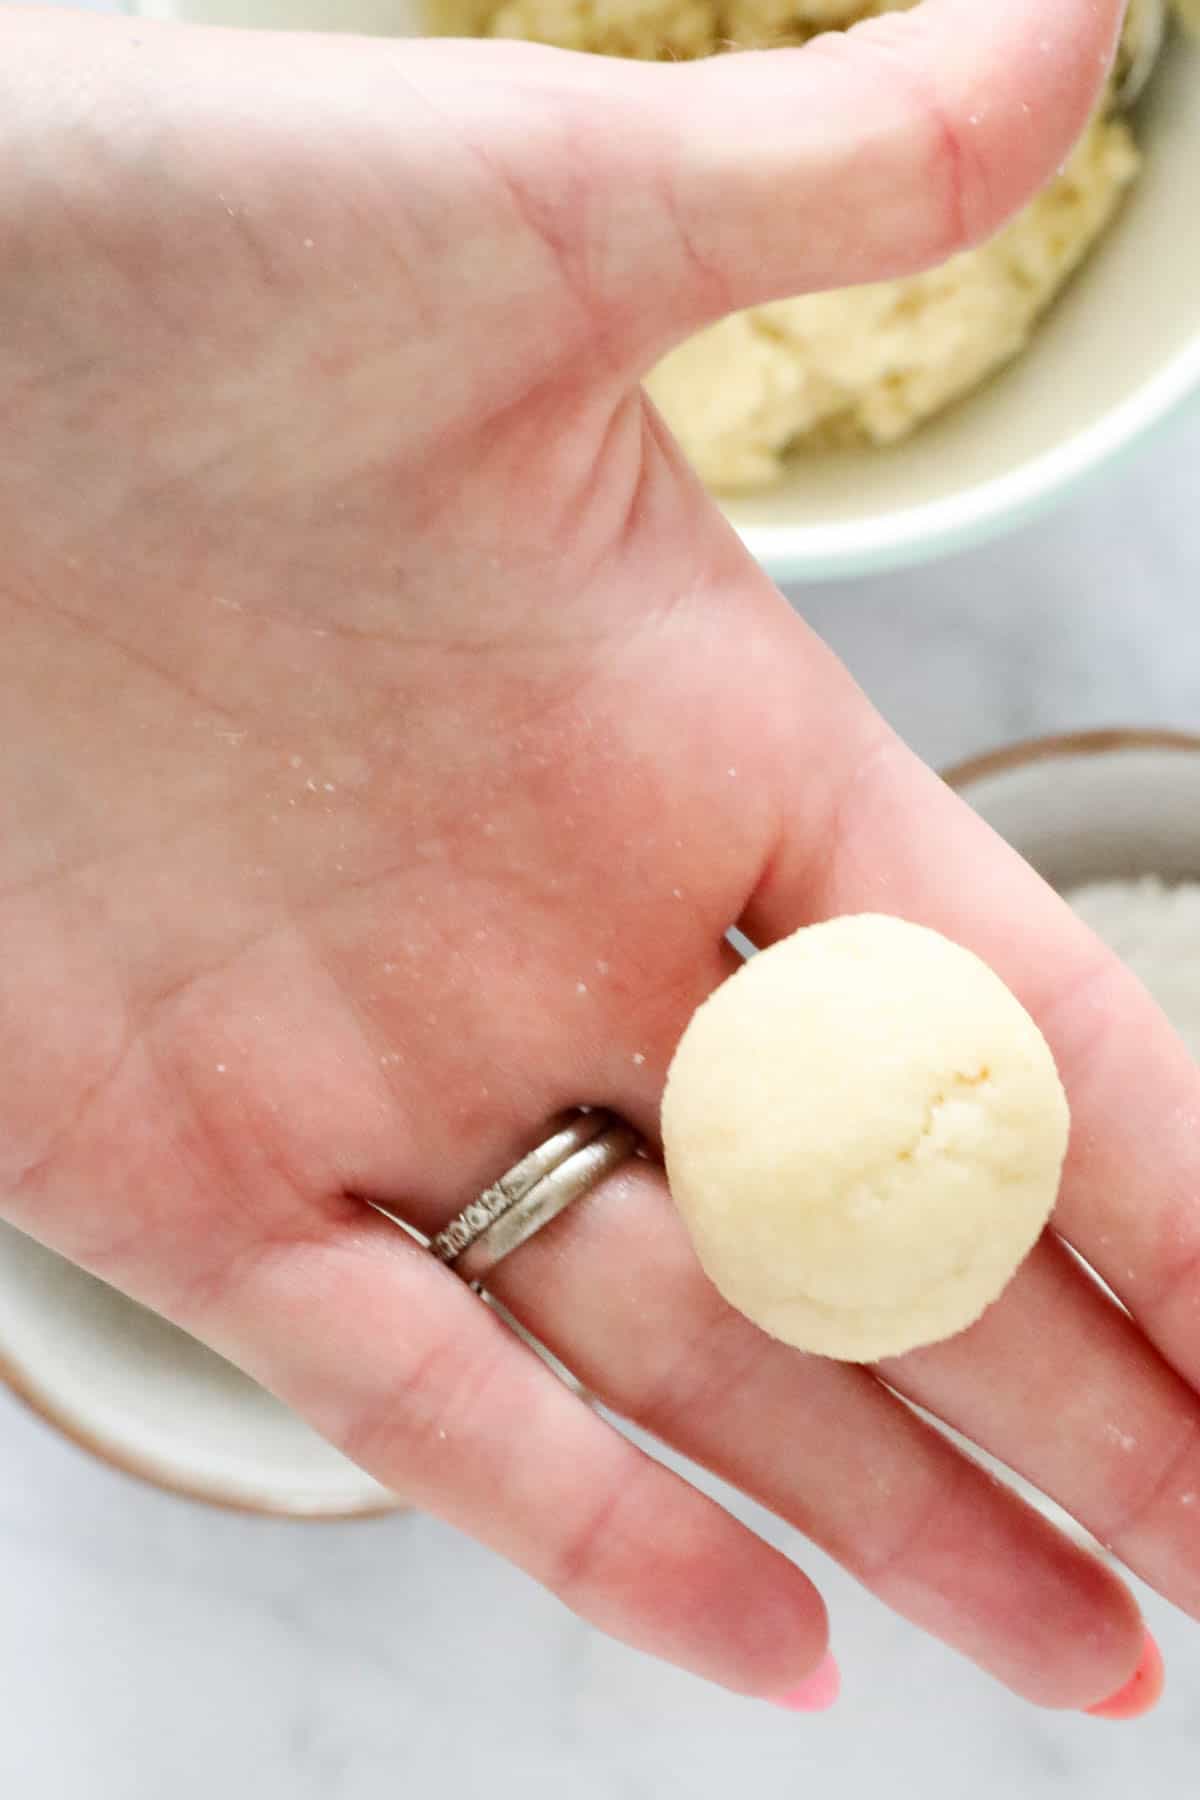 An cookie dough ball held up in a hand.